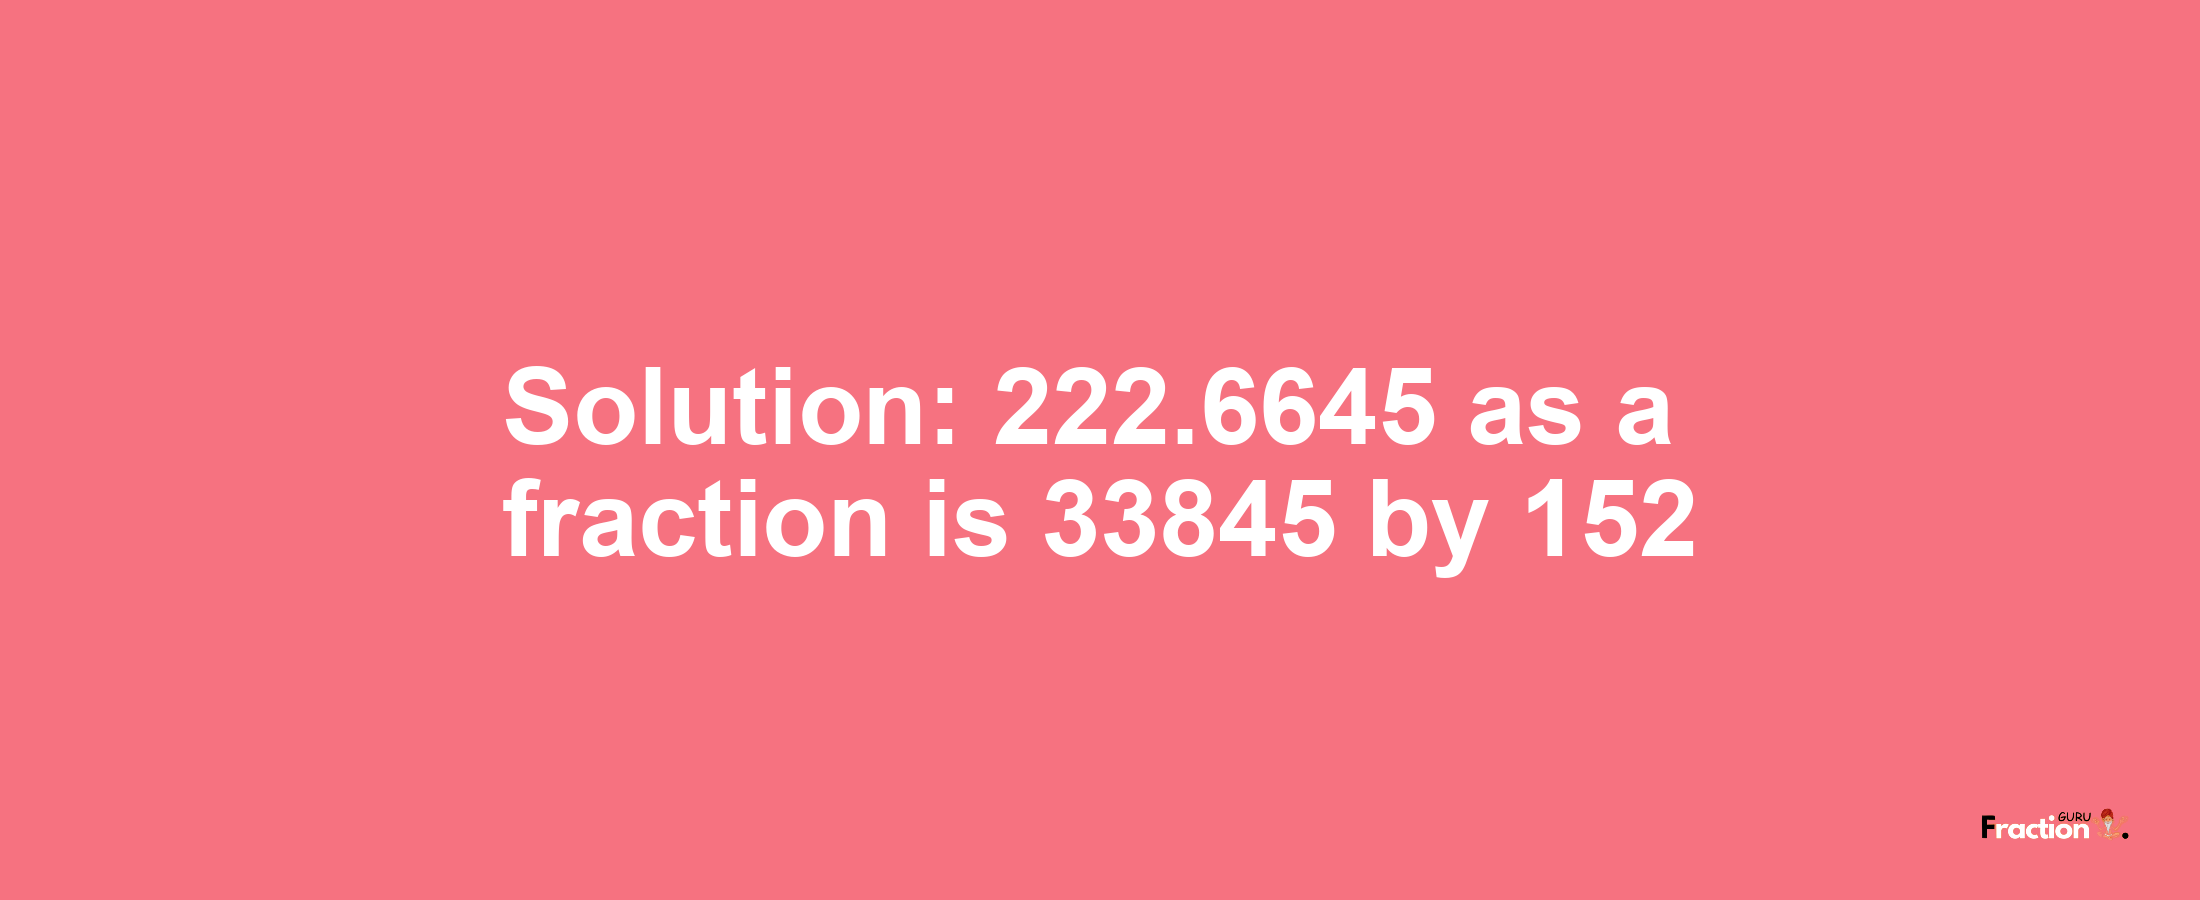 Solution:222.6645 as a fraction is 33845/152